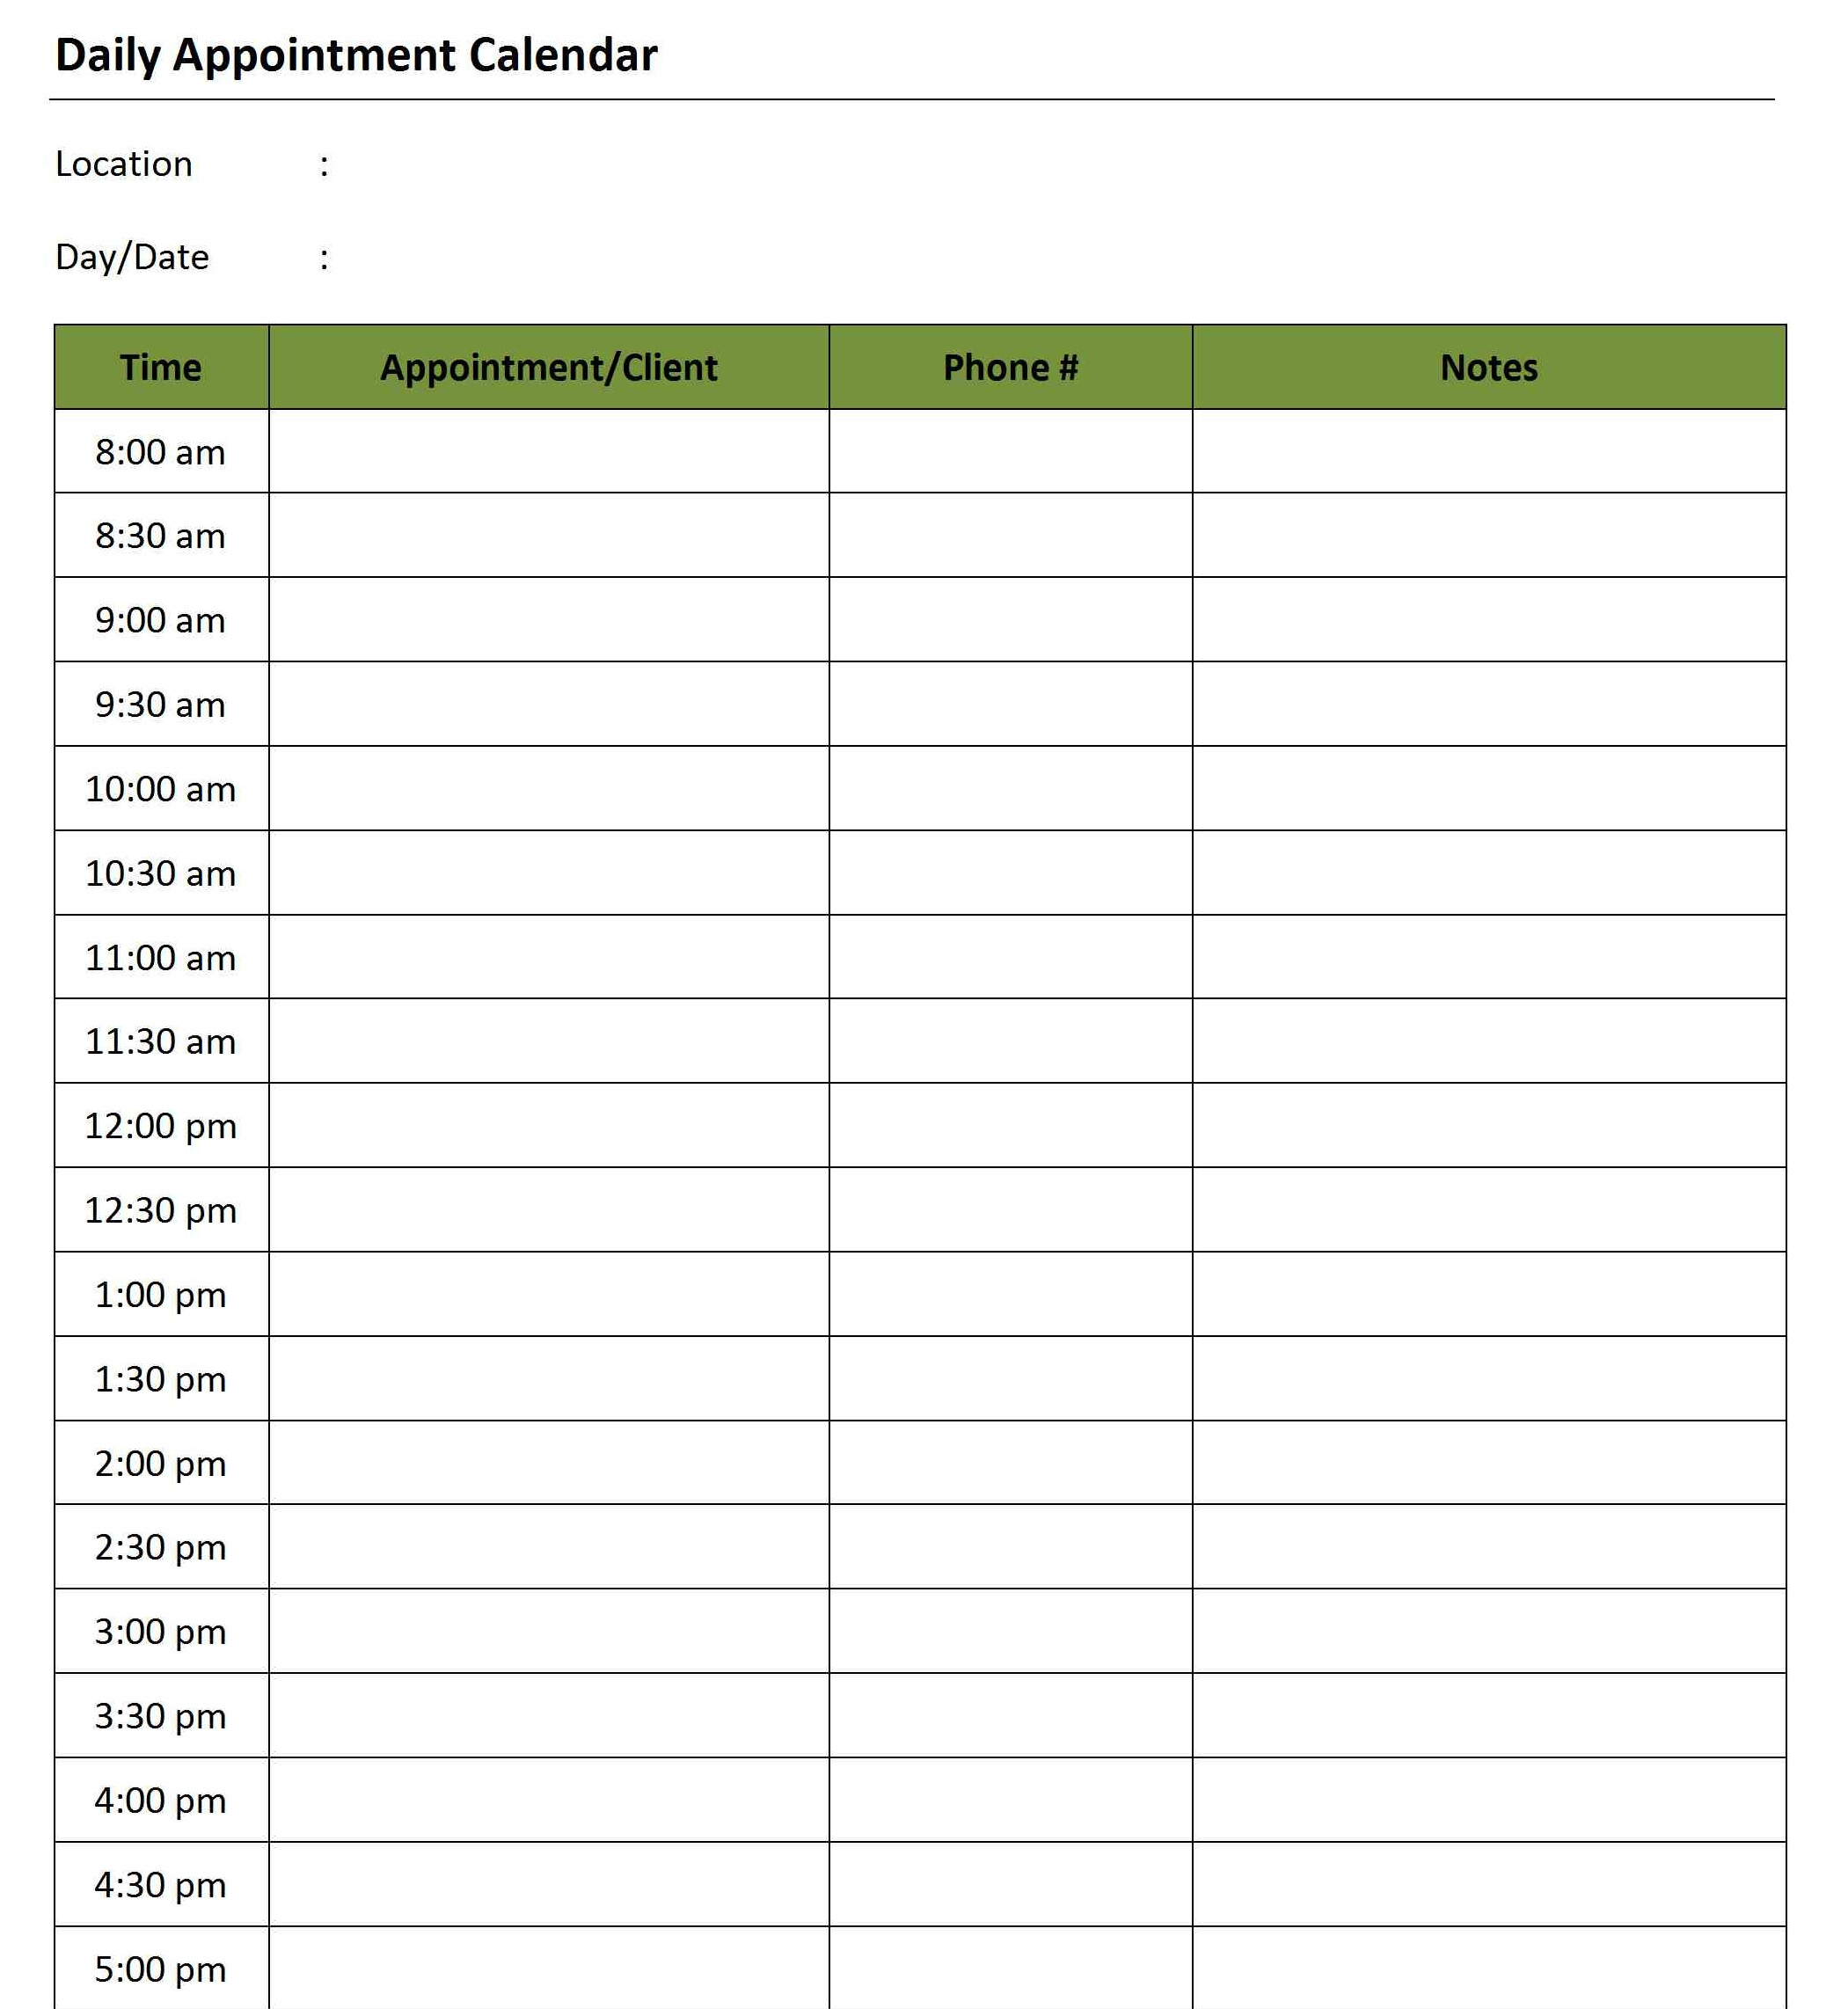 Daily Appointment Calendar Template Daily Appointment Calendar